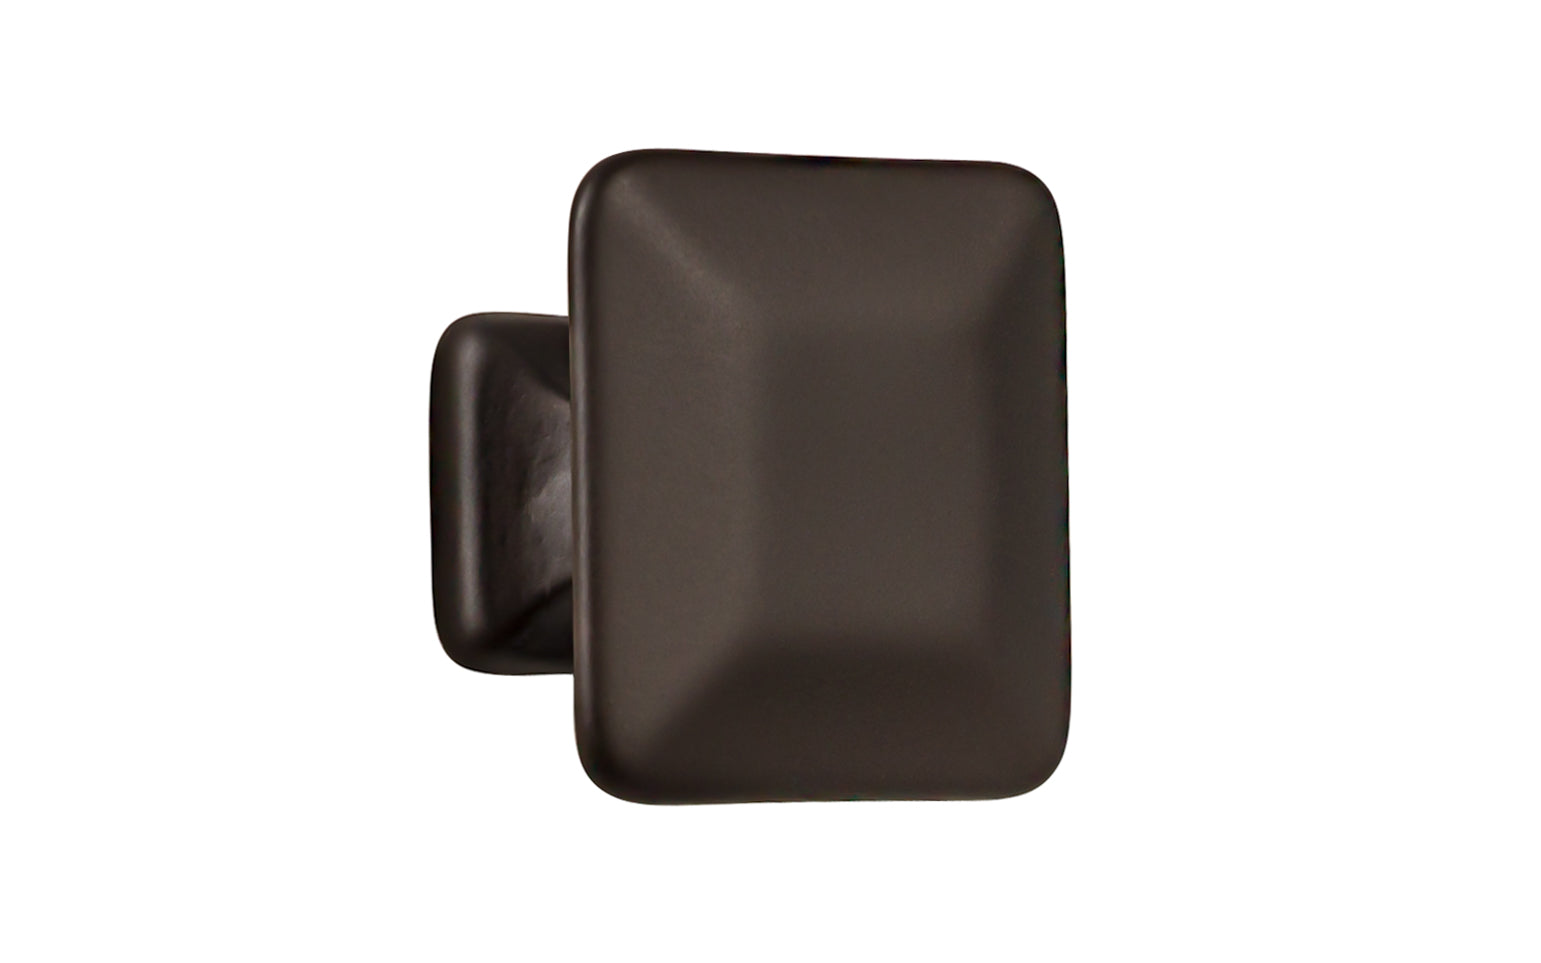 Vintage-style Hardware · Solid Brass Pyramid Shape Square Cabinet Knob ~ 1-1/4" size knob. Made of solid brass, this stylish knob has a smooth & weighty feel. Mission-style, Arts & Crafts style of hardware. Oil Rubbed Bronze Finish